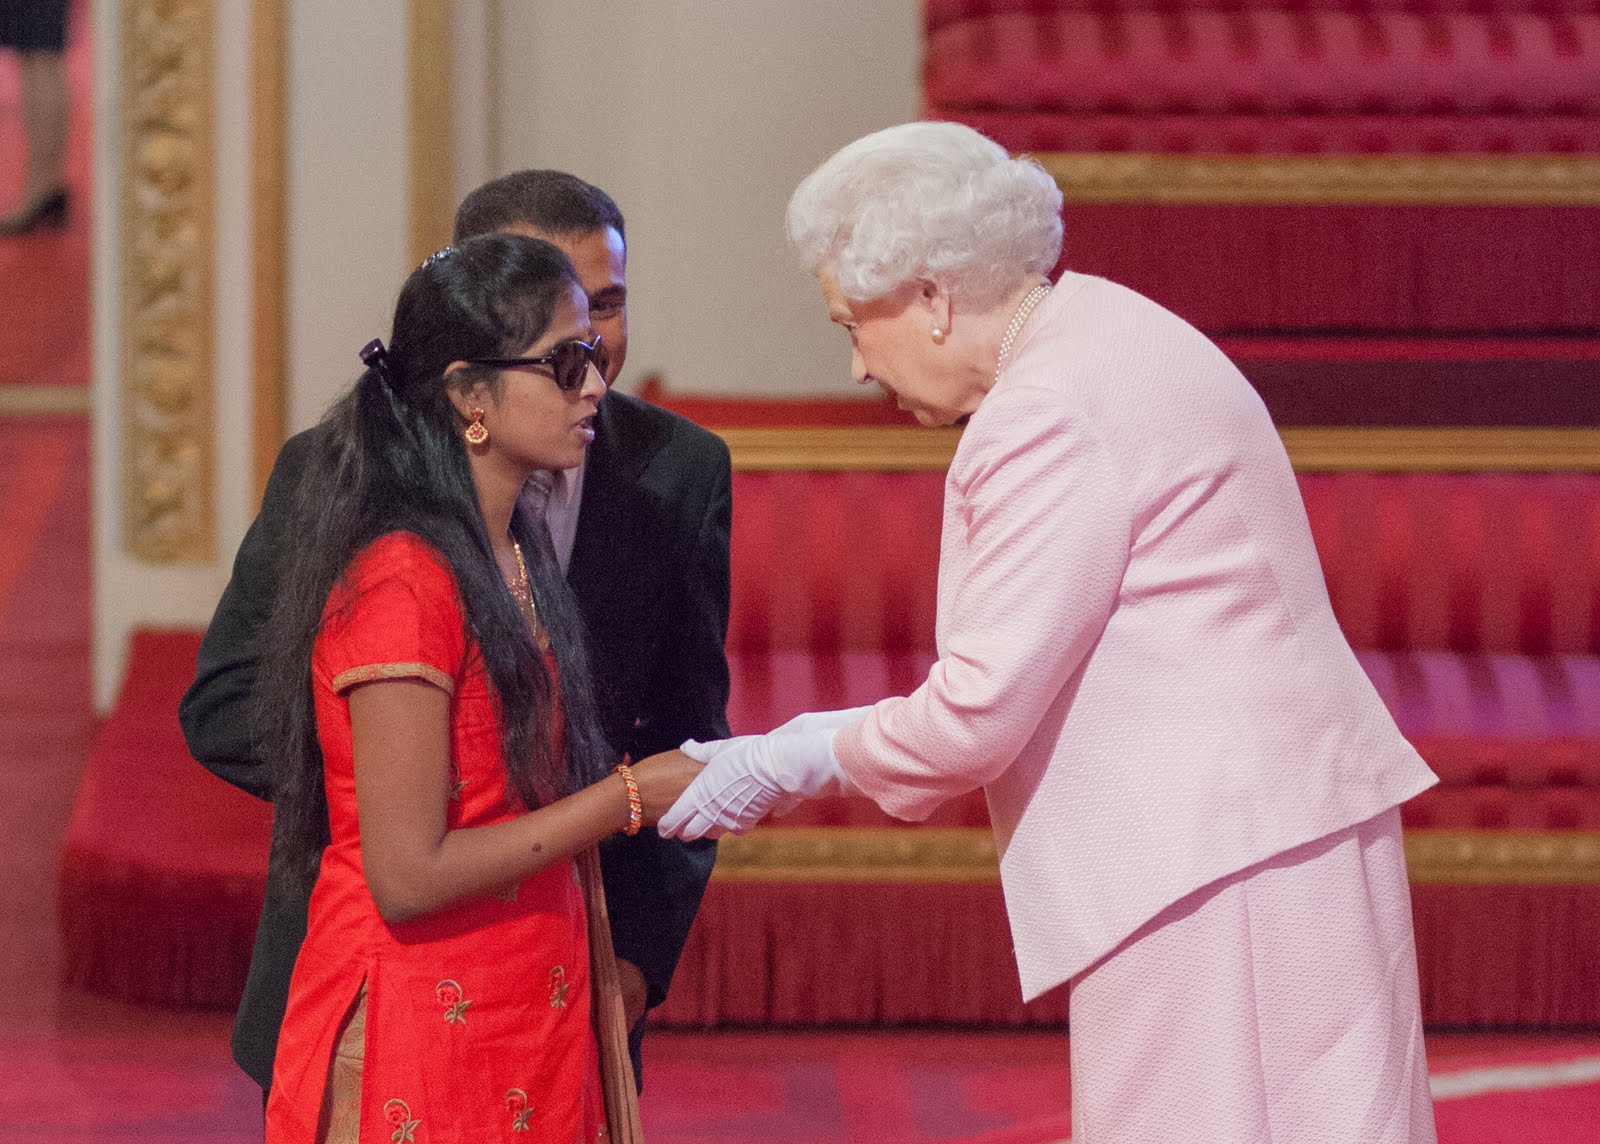 Ashwini Angadi 2015 Queen's Young Leader from India